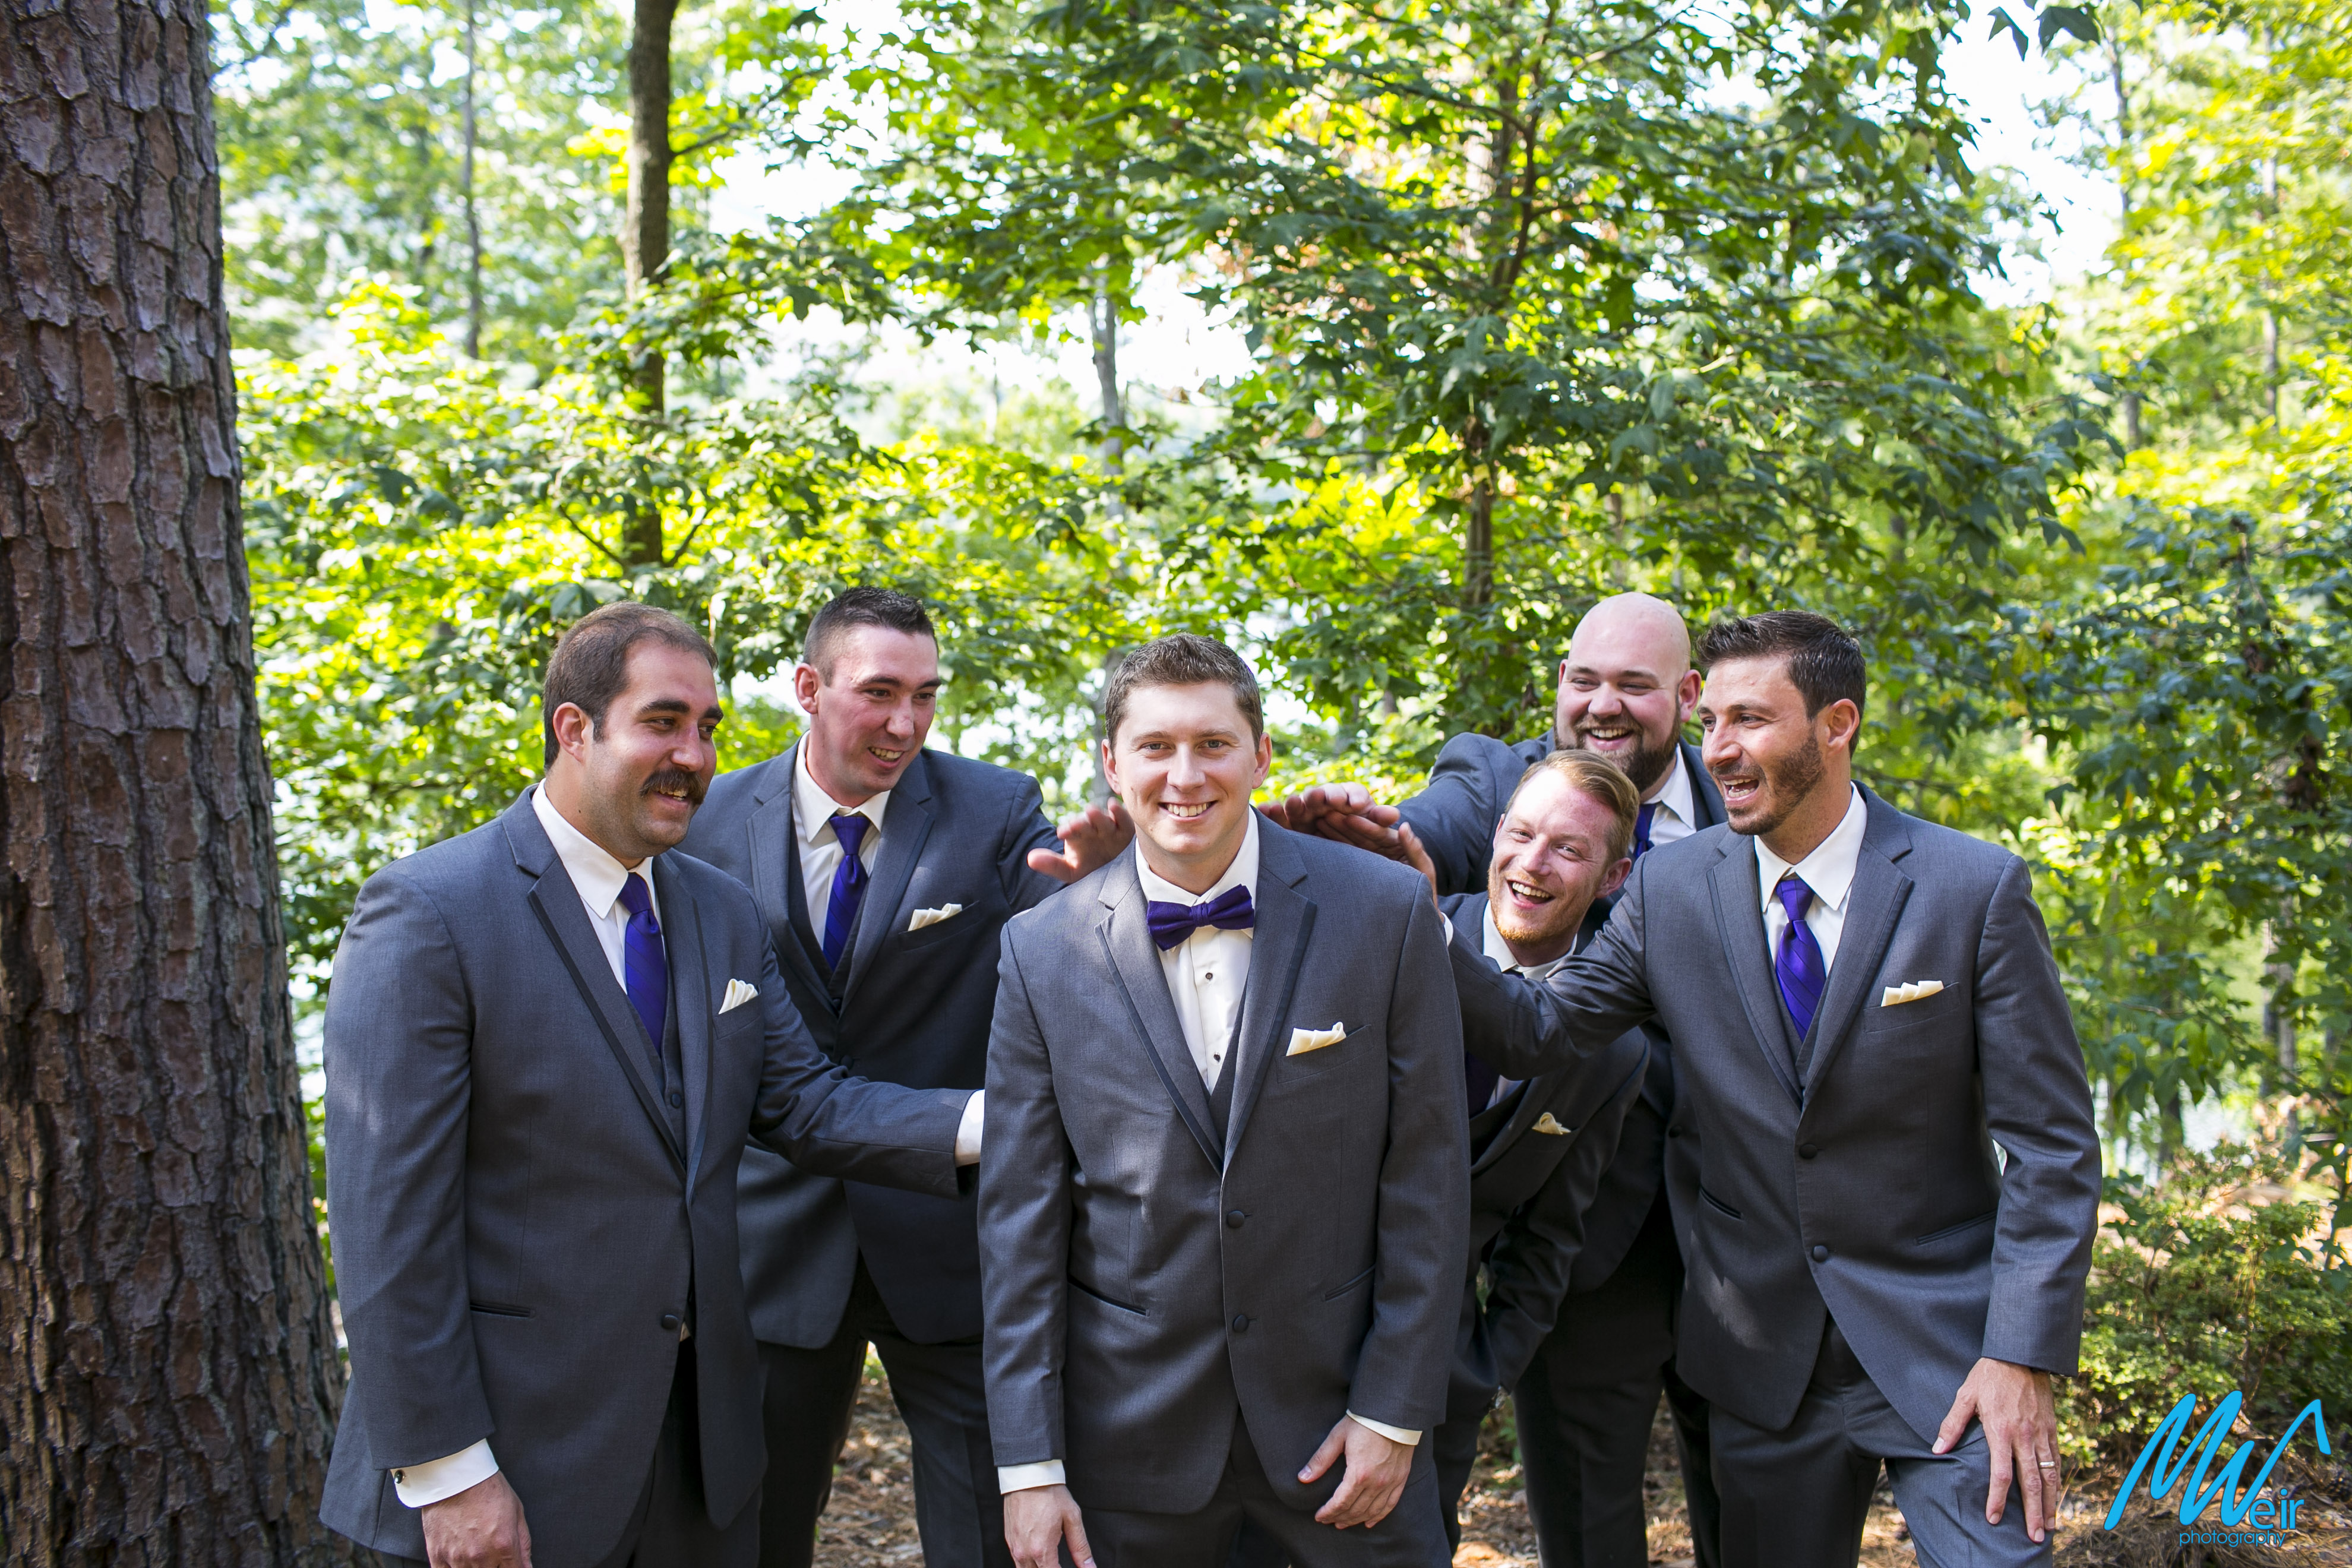 groomsmen give groom a jovial pat on the back in the woods